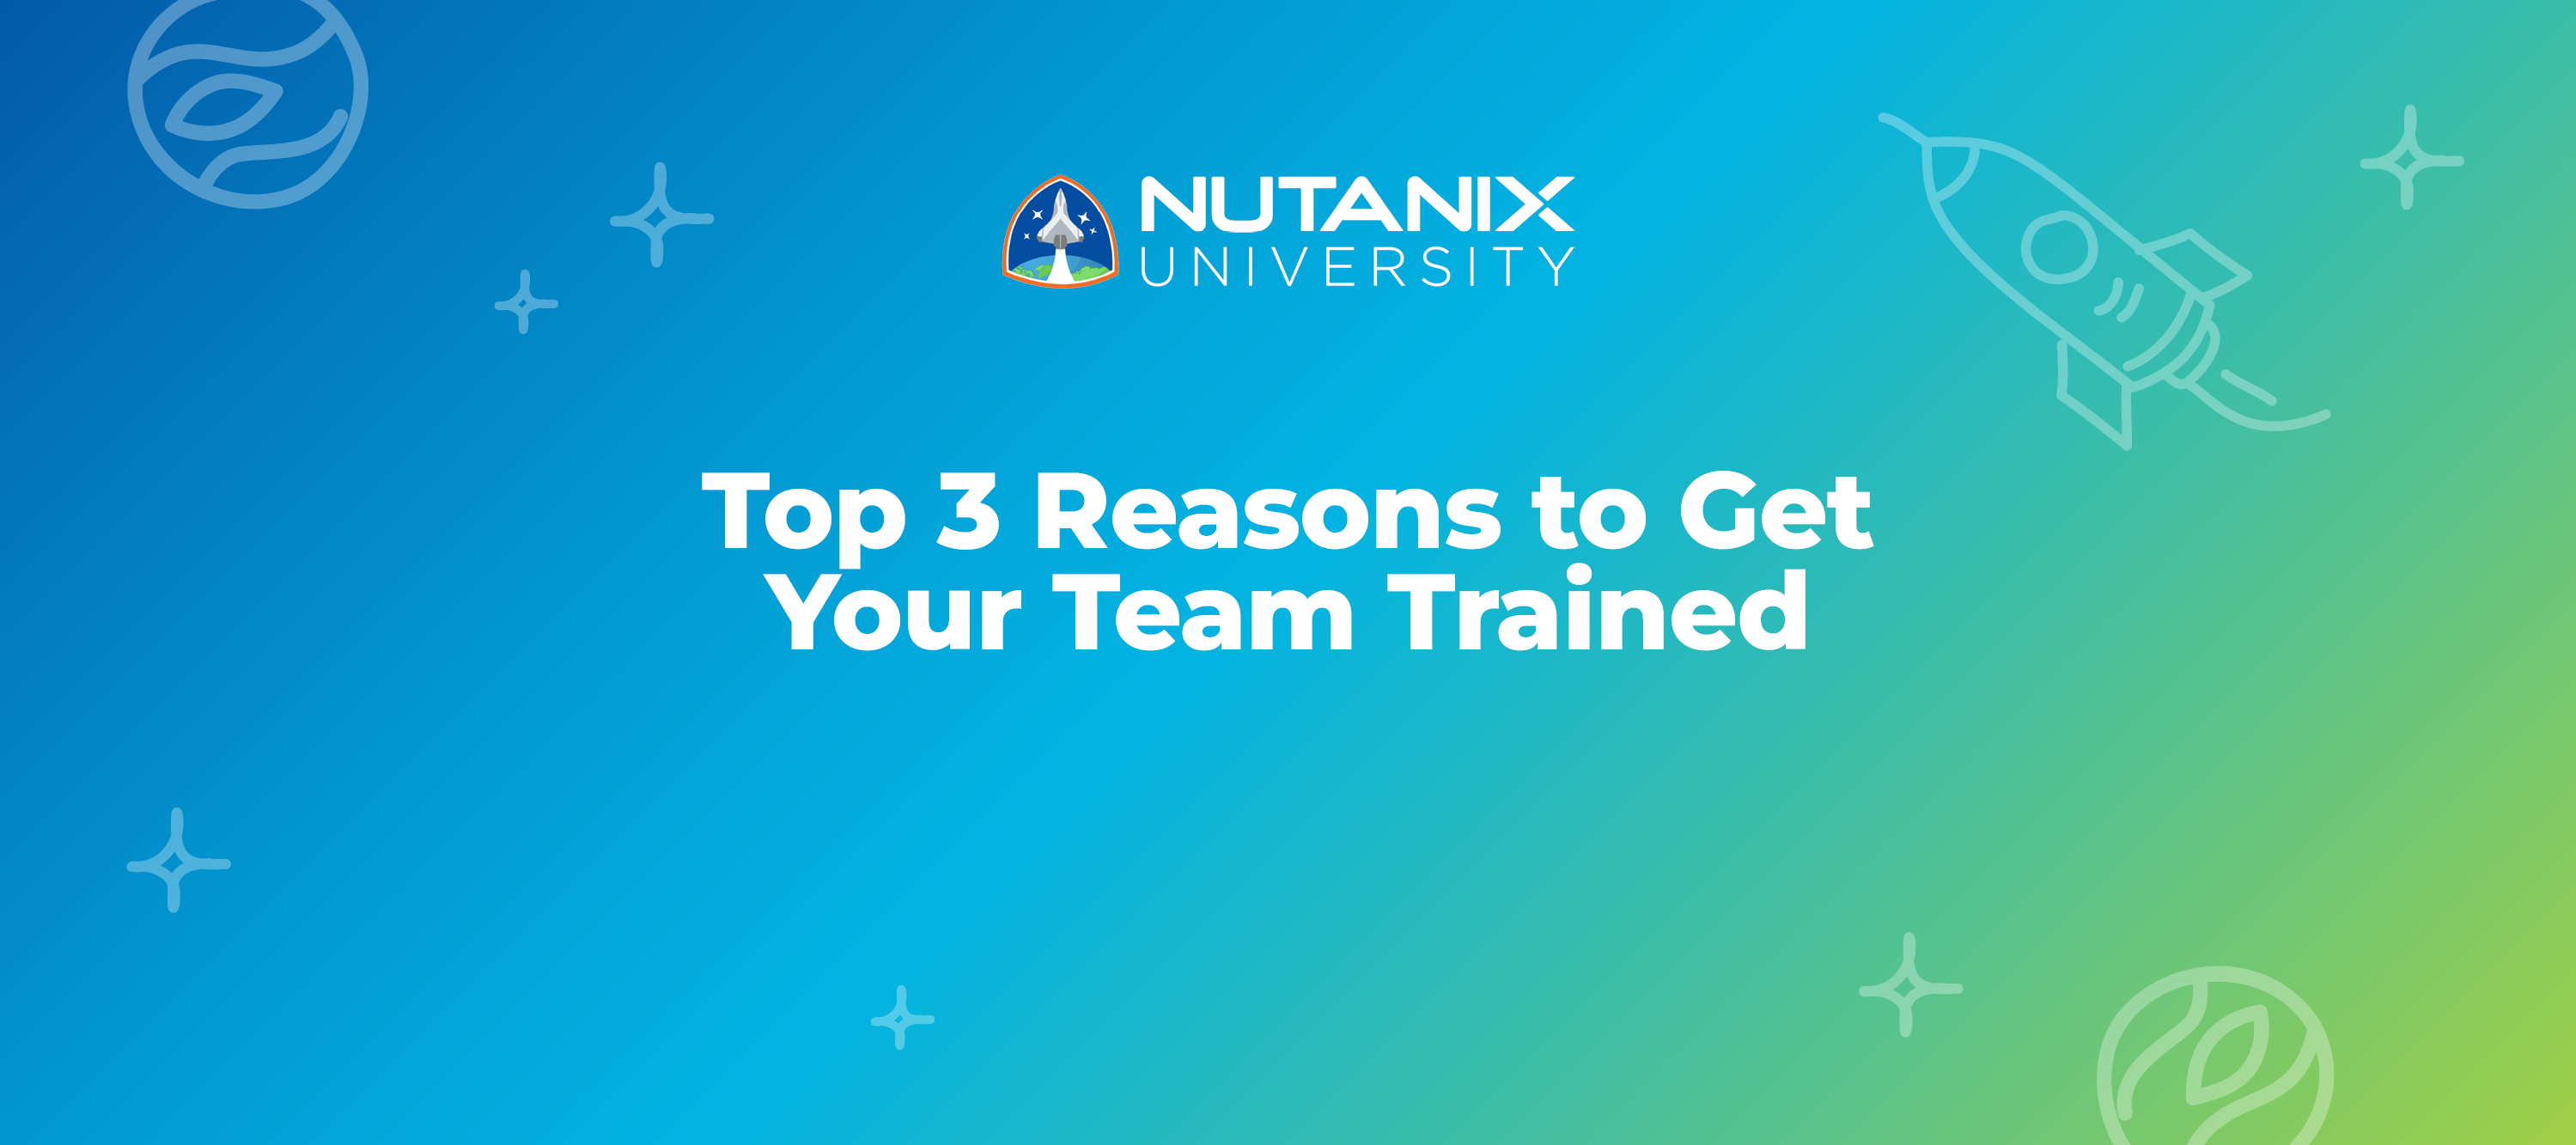 Top 3 Reasons to Get Your Team Trained